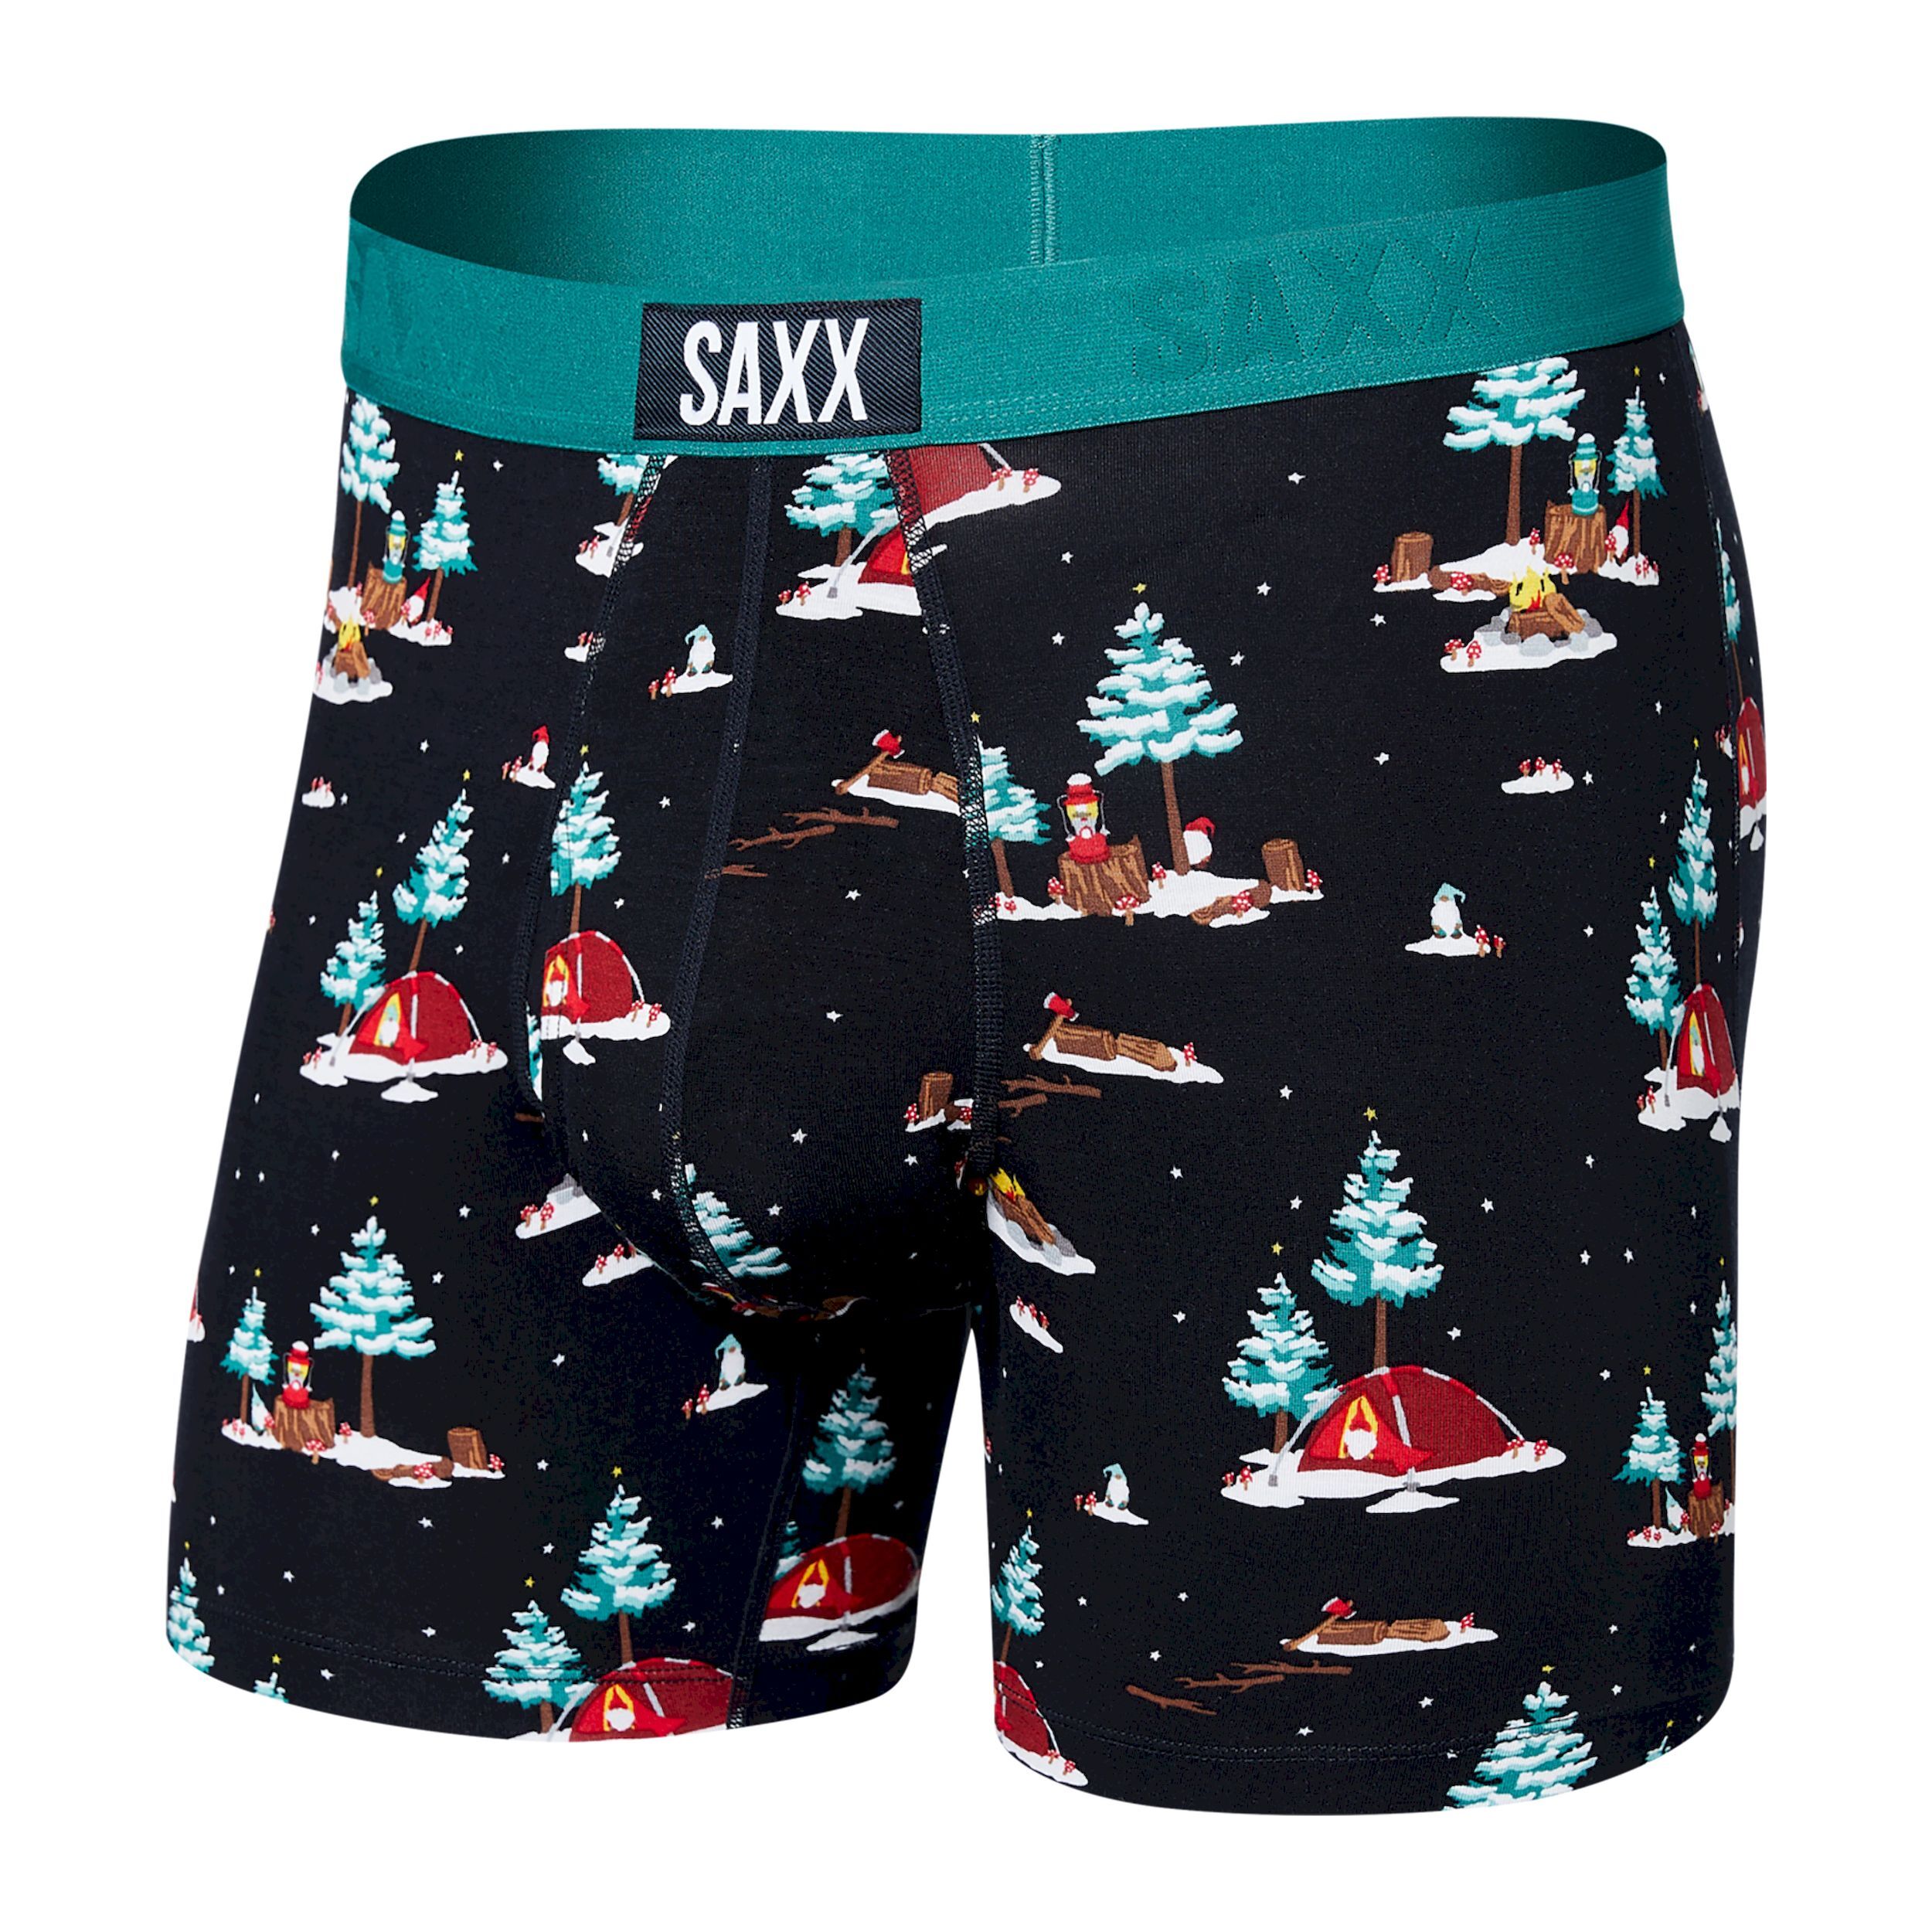 Saxx M's Classic Vibe 3-Pack Boxers  Outdoor stores, sports, cycling,  skiing, climbing